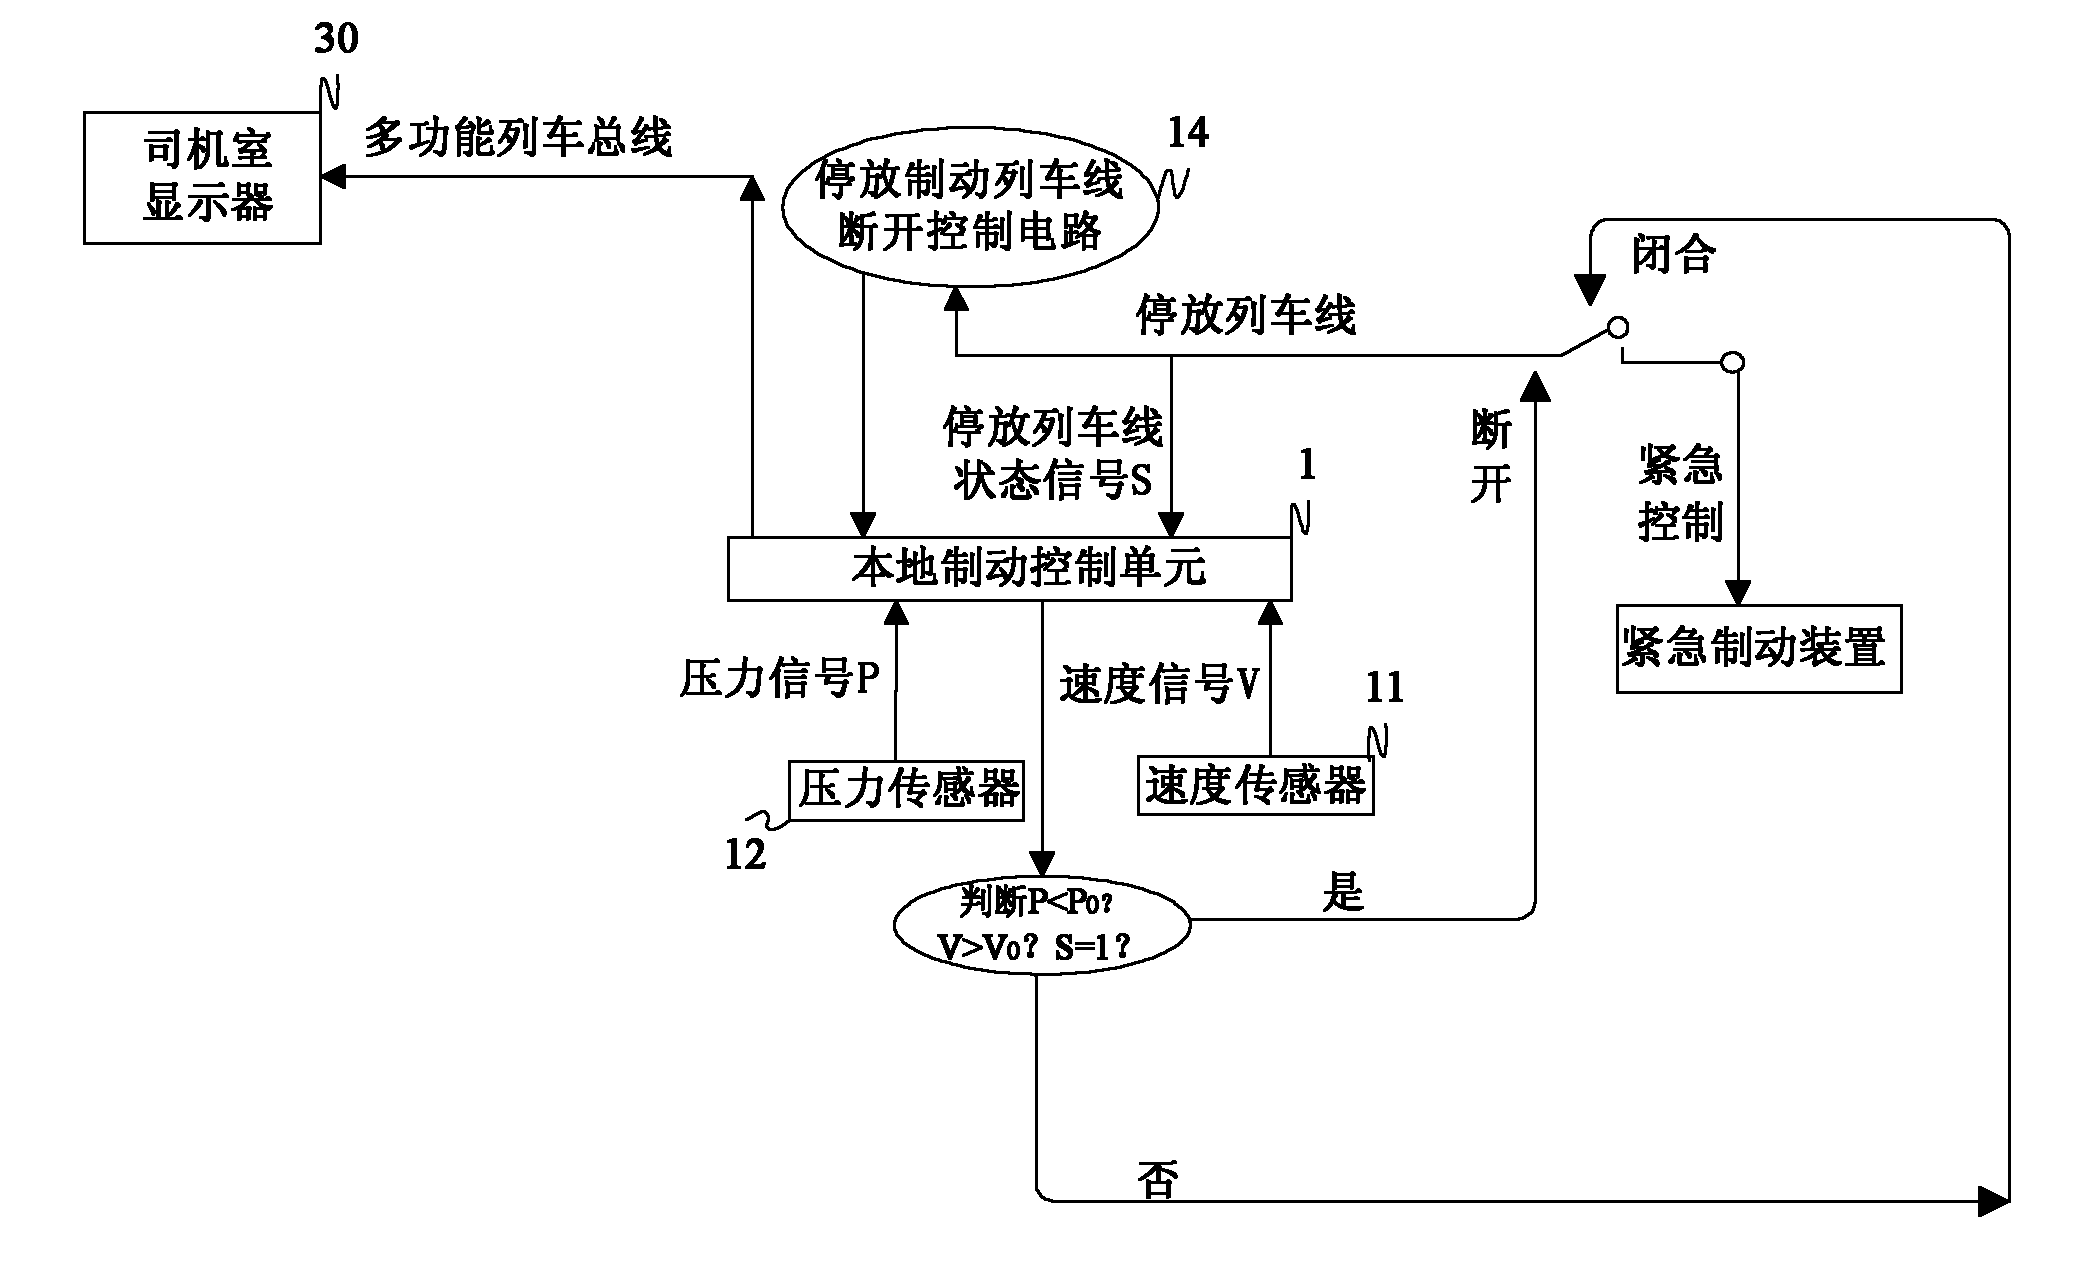 Method and system for preventing applied accidental parking brake on railway train